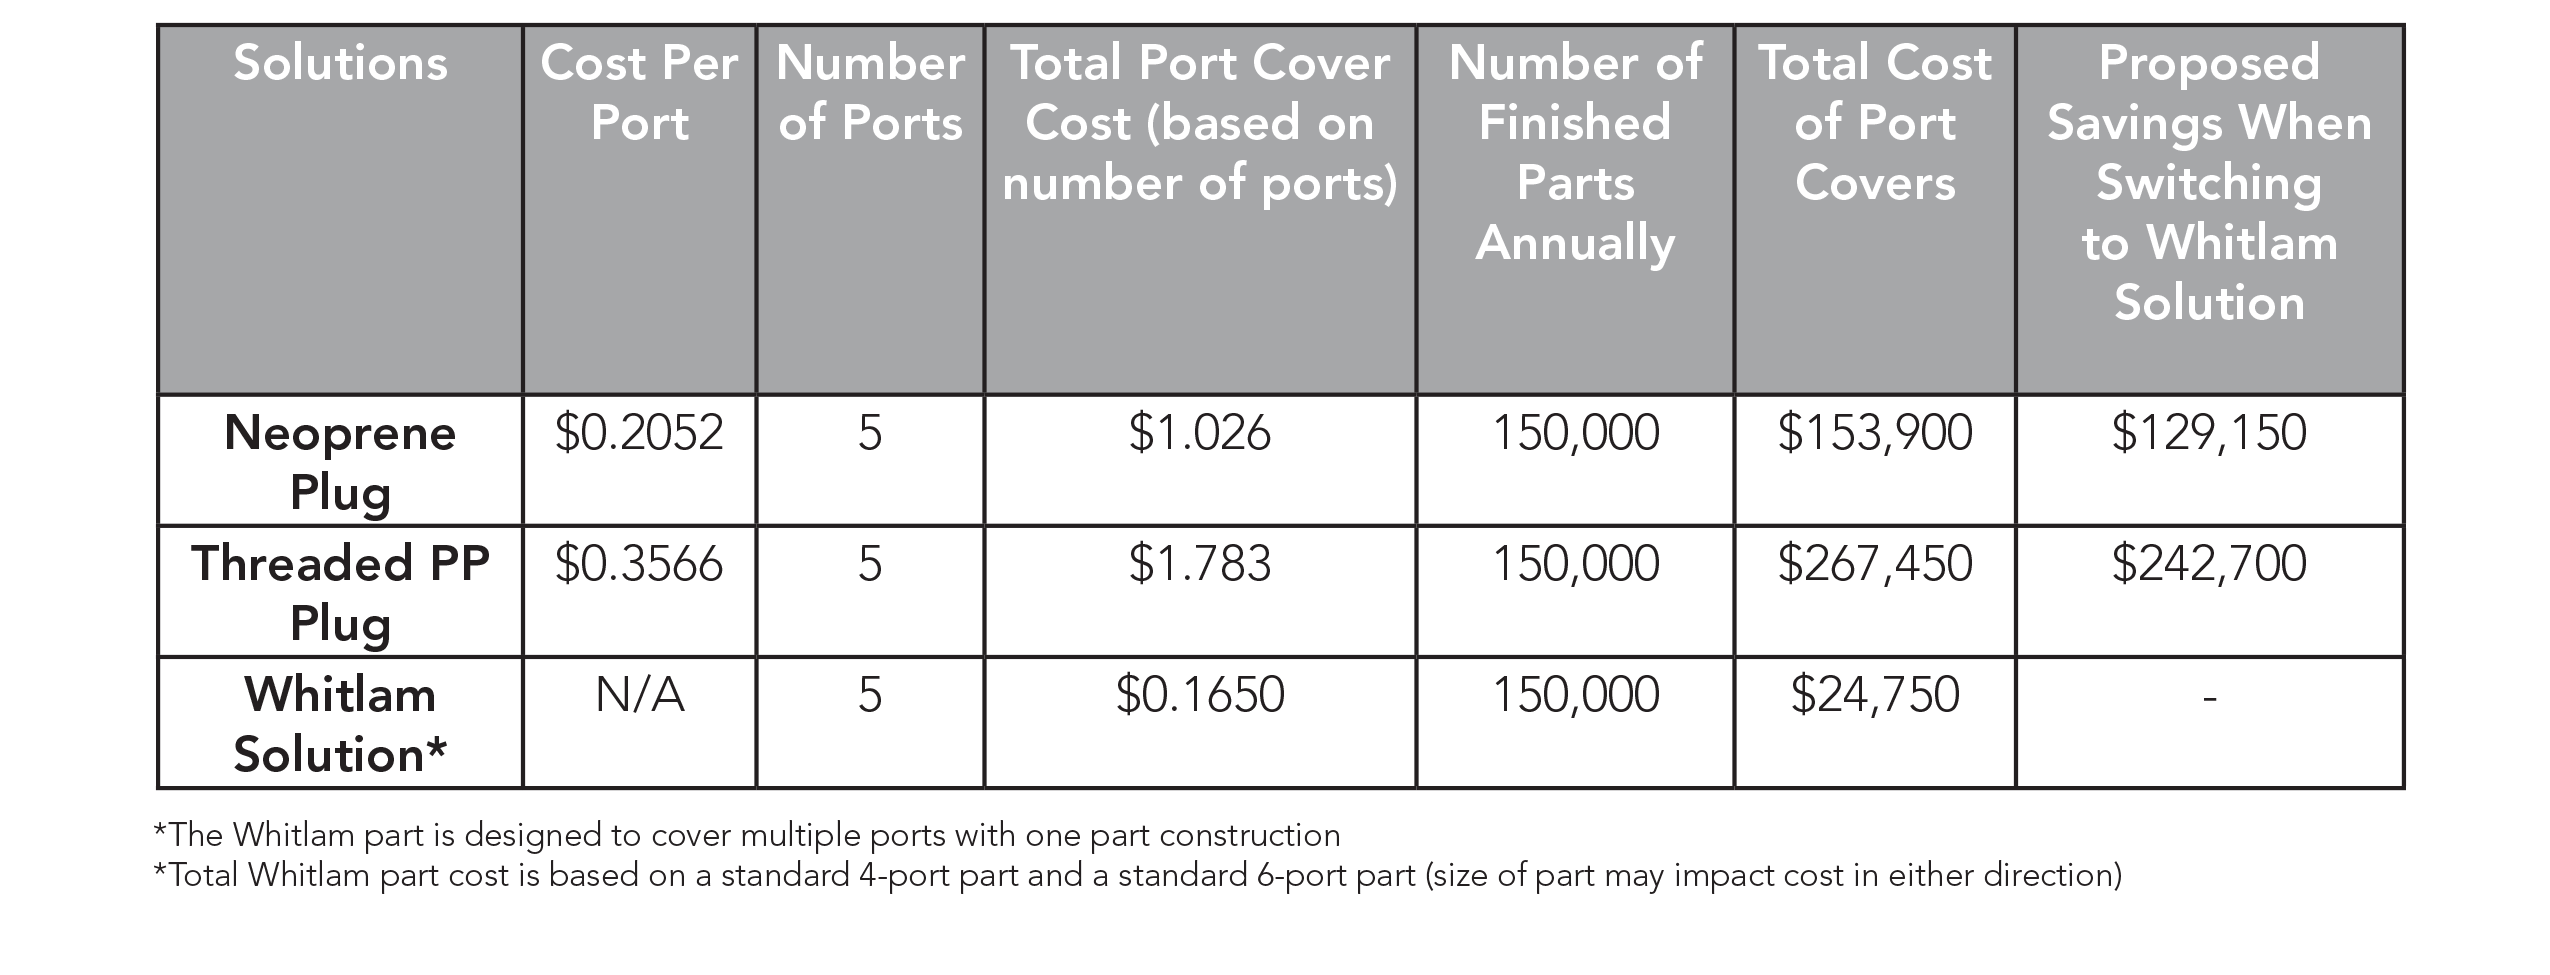 Port Dust Cover Cost Savings